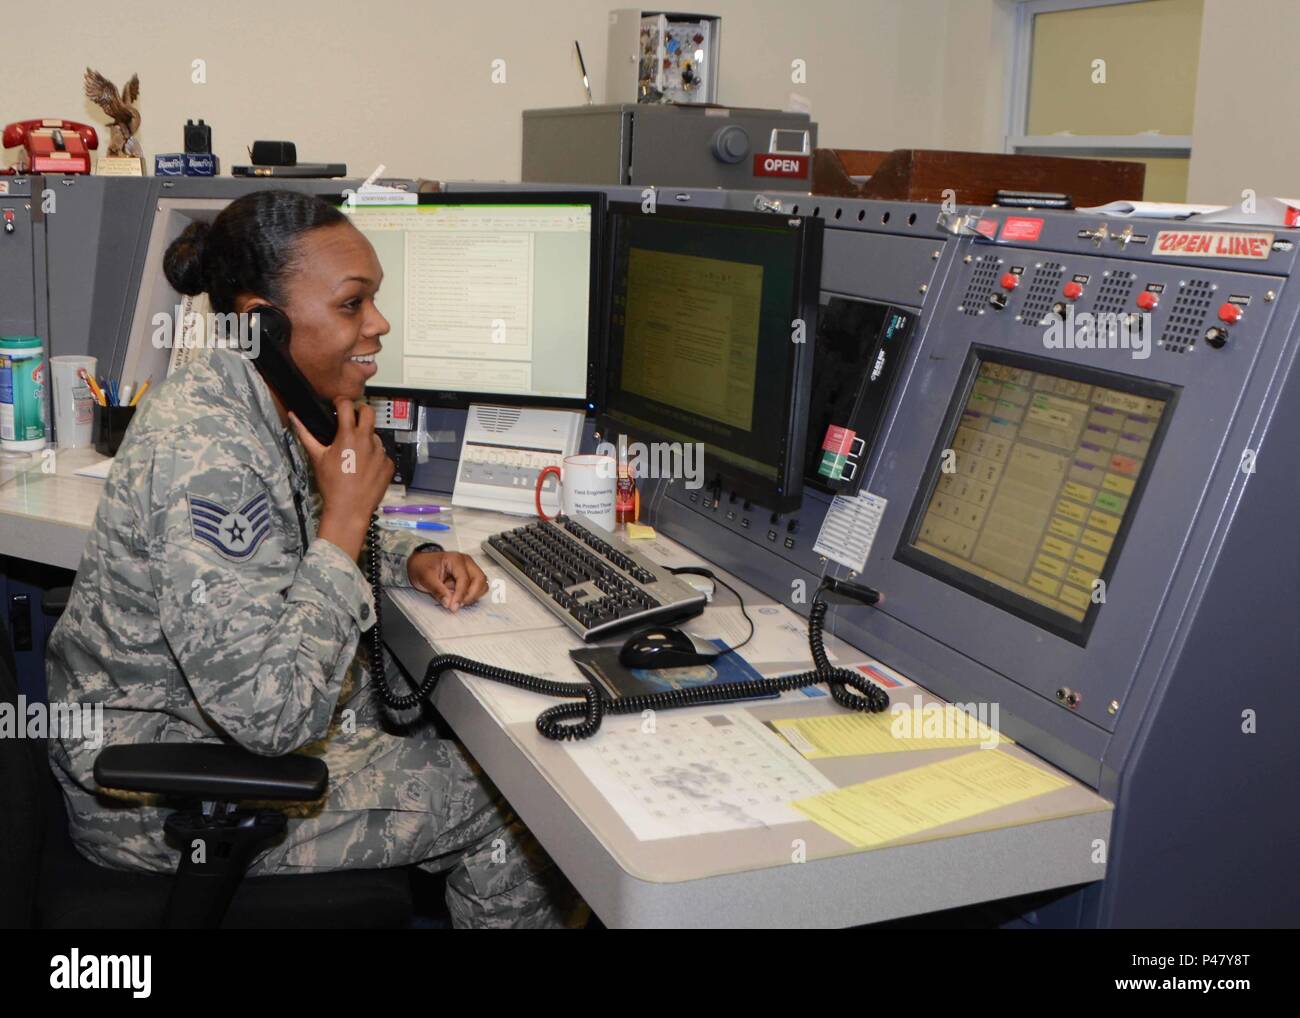 Staff Sgt. Shantel Ellis, 507th Air Refueling Wing command post controller coordinates with maintenance during the June Operational Exercise at Tinker Air Force Base, Okla. June 2, 2016. Command post controllers along with maintenance professionals in the maintenance operations control center were tested by running numerous checklists, relaying command information, tracking aircraft, answering radio and phone calls while dispatching crews. (U.S. Air Force Photo/Tech Sgt. Lauren Gleason)      Senior Airman Nathalie Hamilton and Jose Gonzales, both crew chiefs with the 507th Aircraft Maintenance Stock Photo